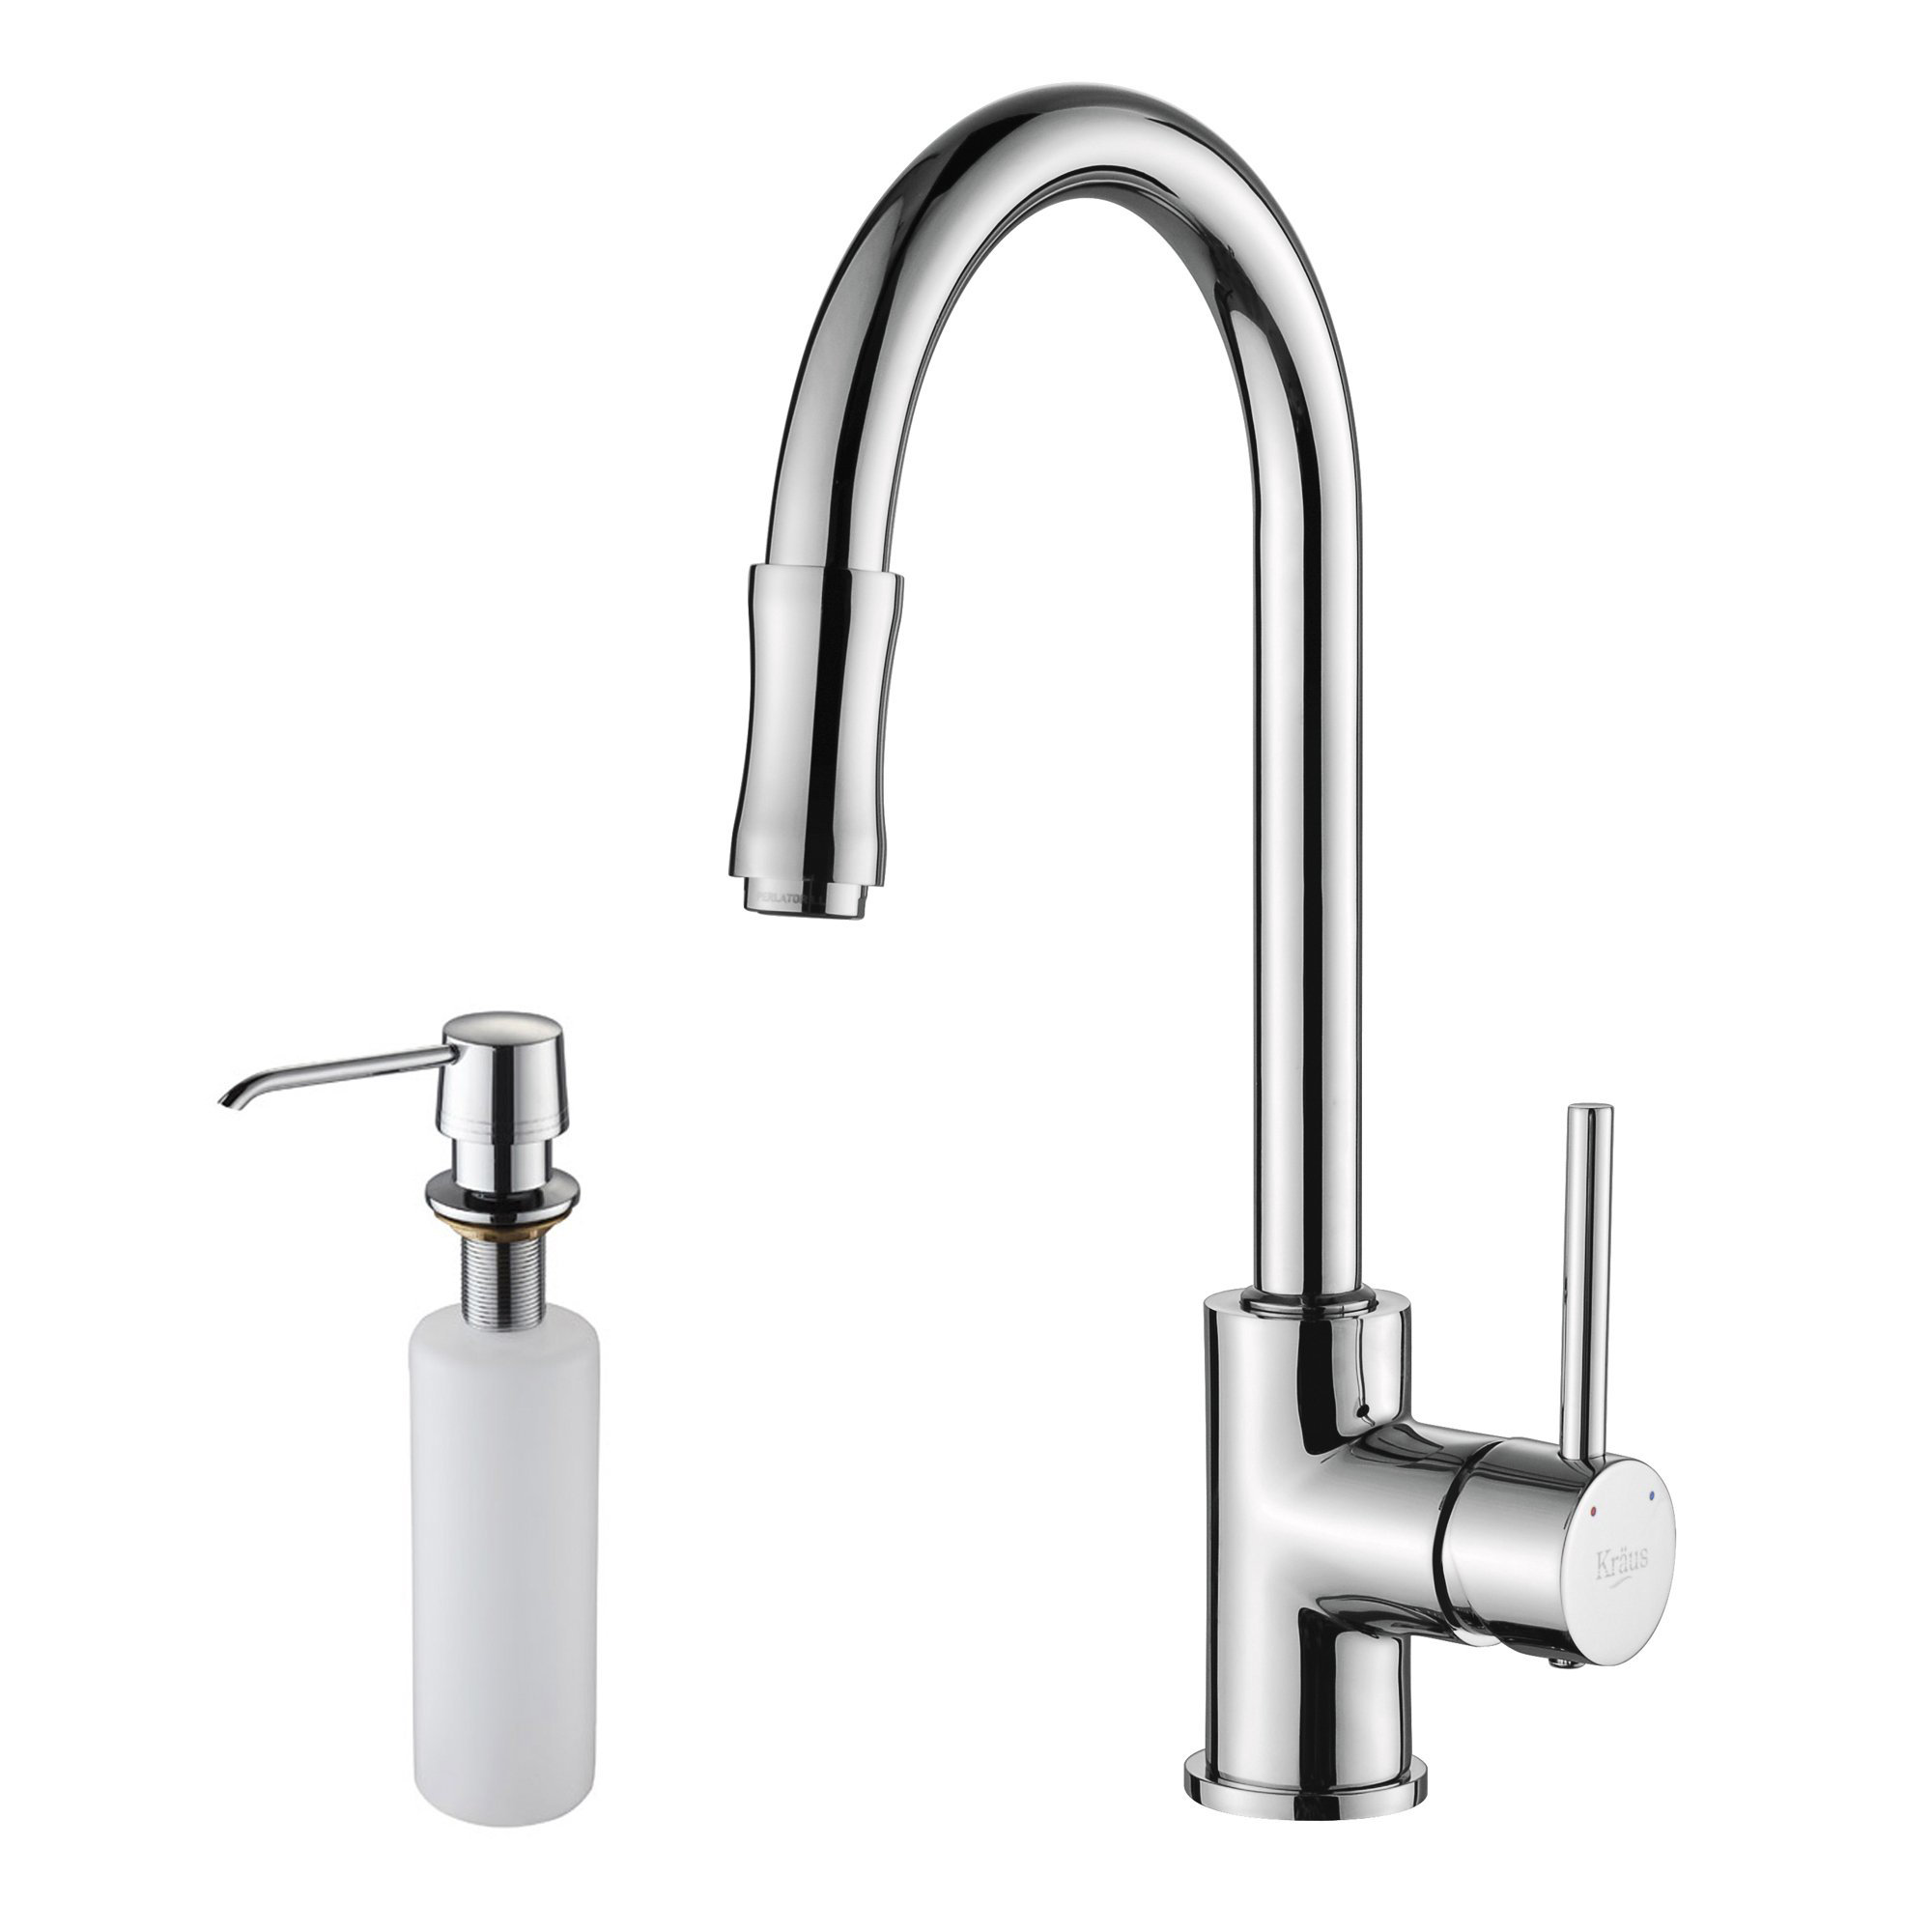 Kraus Single Handle Pull Down Kitchen Faucet Set with ...